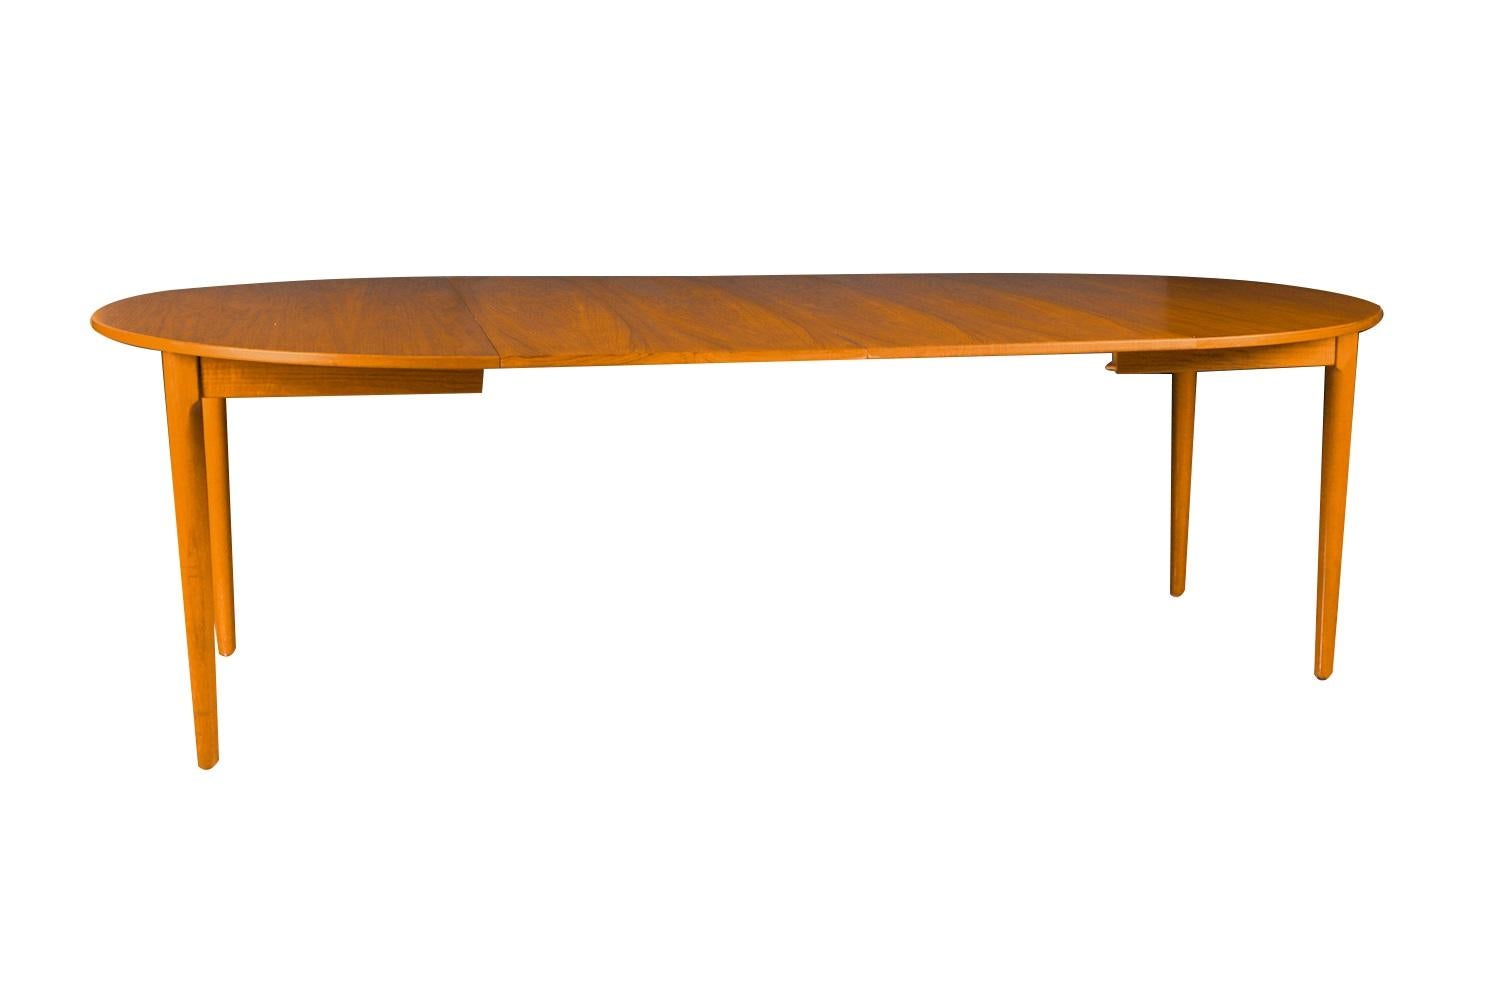 Beautiful Mid-Century Modern expandable teak dining table designed by Erik Buck and made by Povl Dinesen, manufactured in Denmark. Featuring richly grained, gleaming teak and smooth, clean lines characteristic of classic Danish design. Remaining in